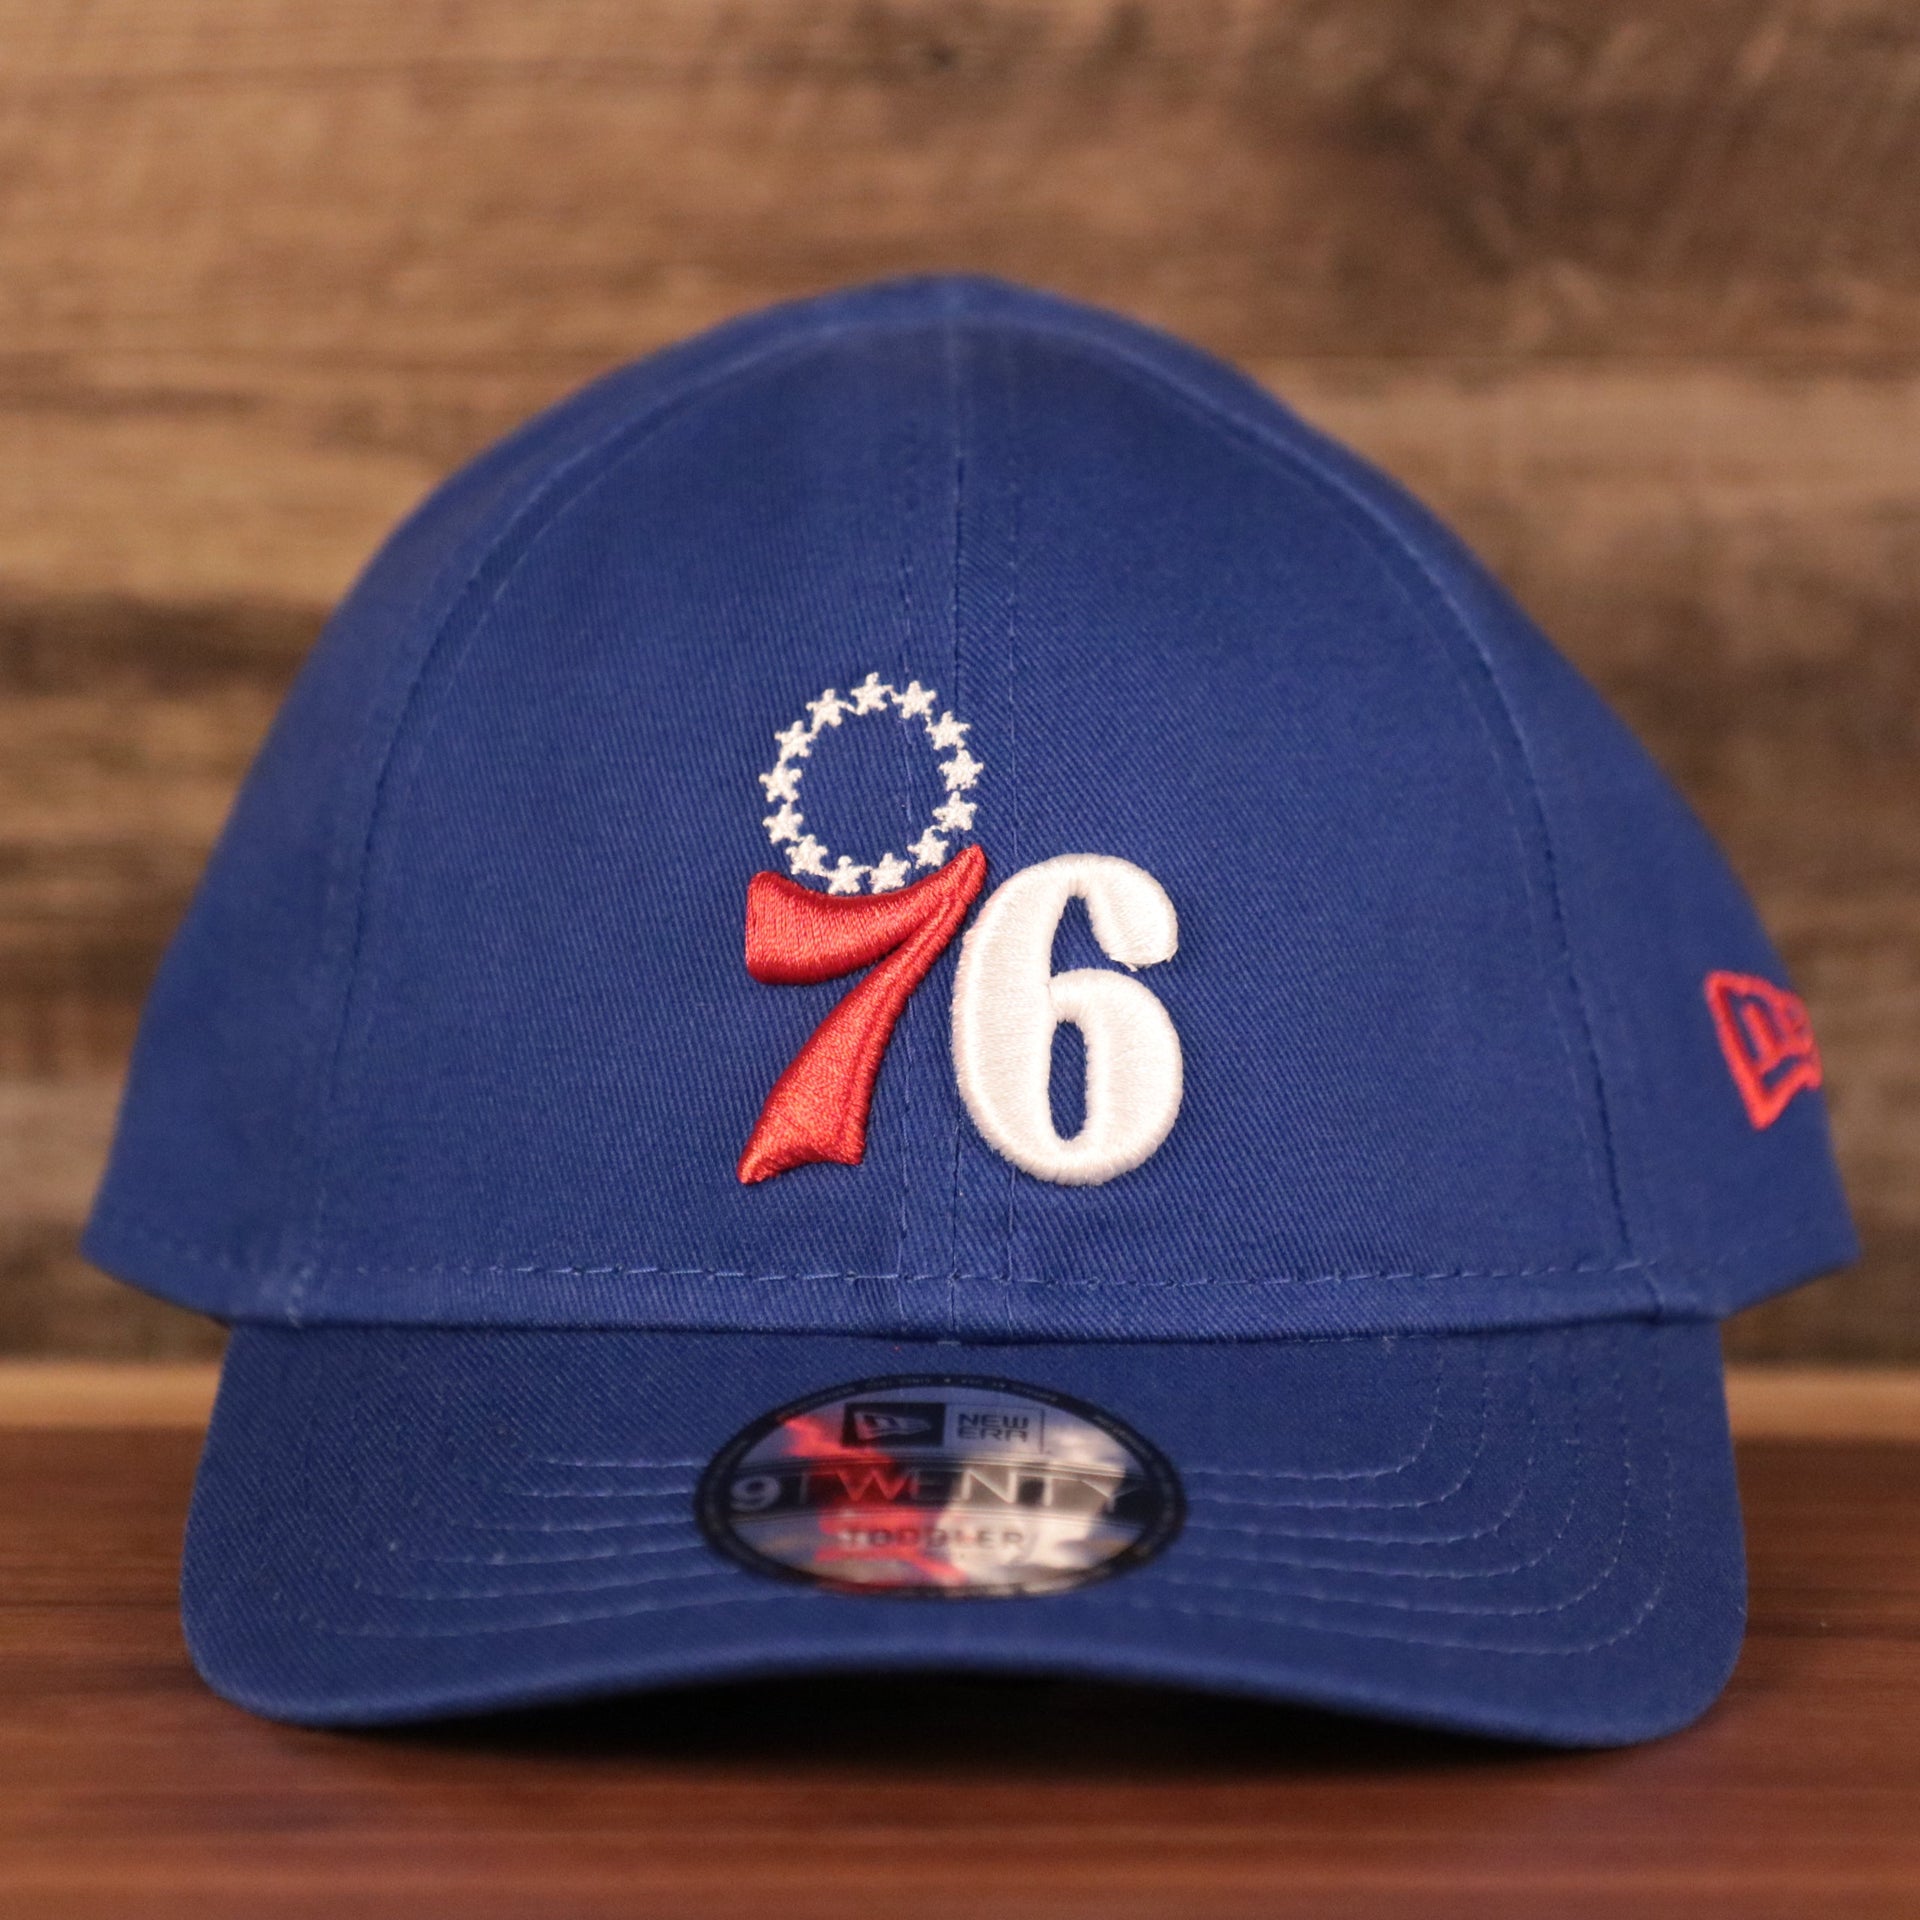 The front side logo of the Philadelphia 76ers on the royal blue New Era toddler ball cap.